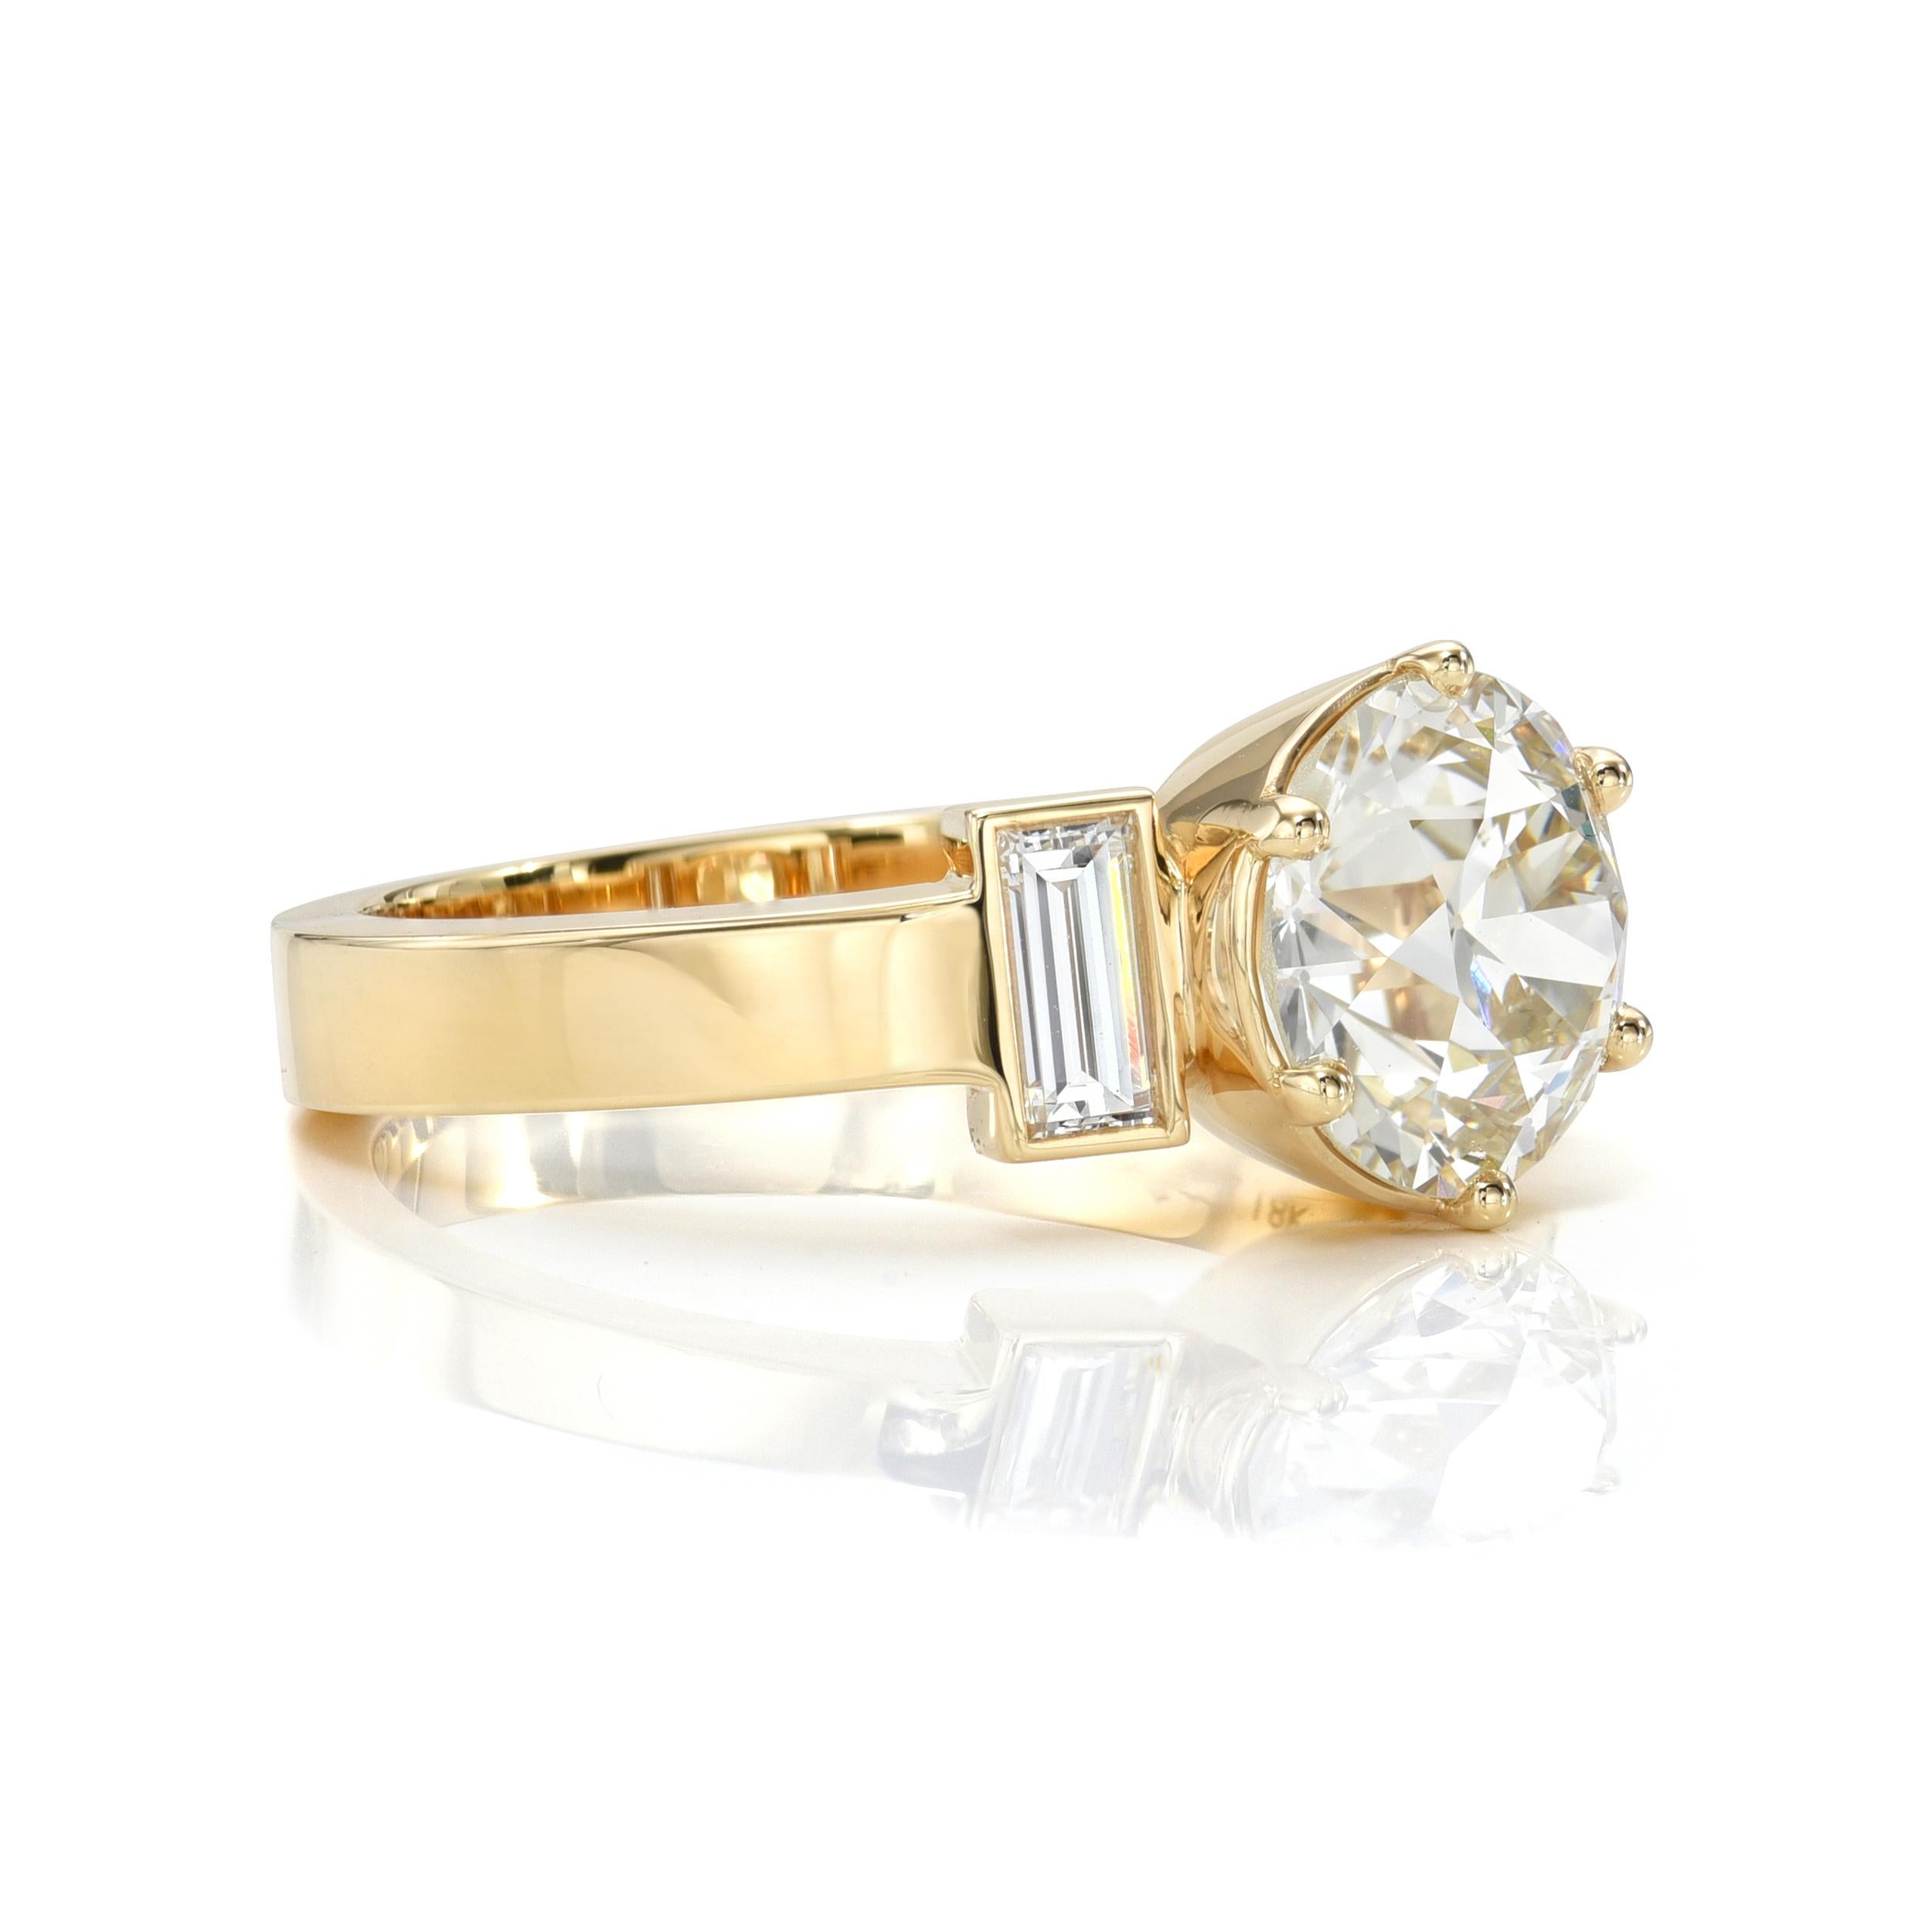 2.20ct L/SI1 GIA certified old European cut diamond with 0.39ctw baguette cut accent diamonds set in a handcrafted 18K yellow gold mounting.